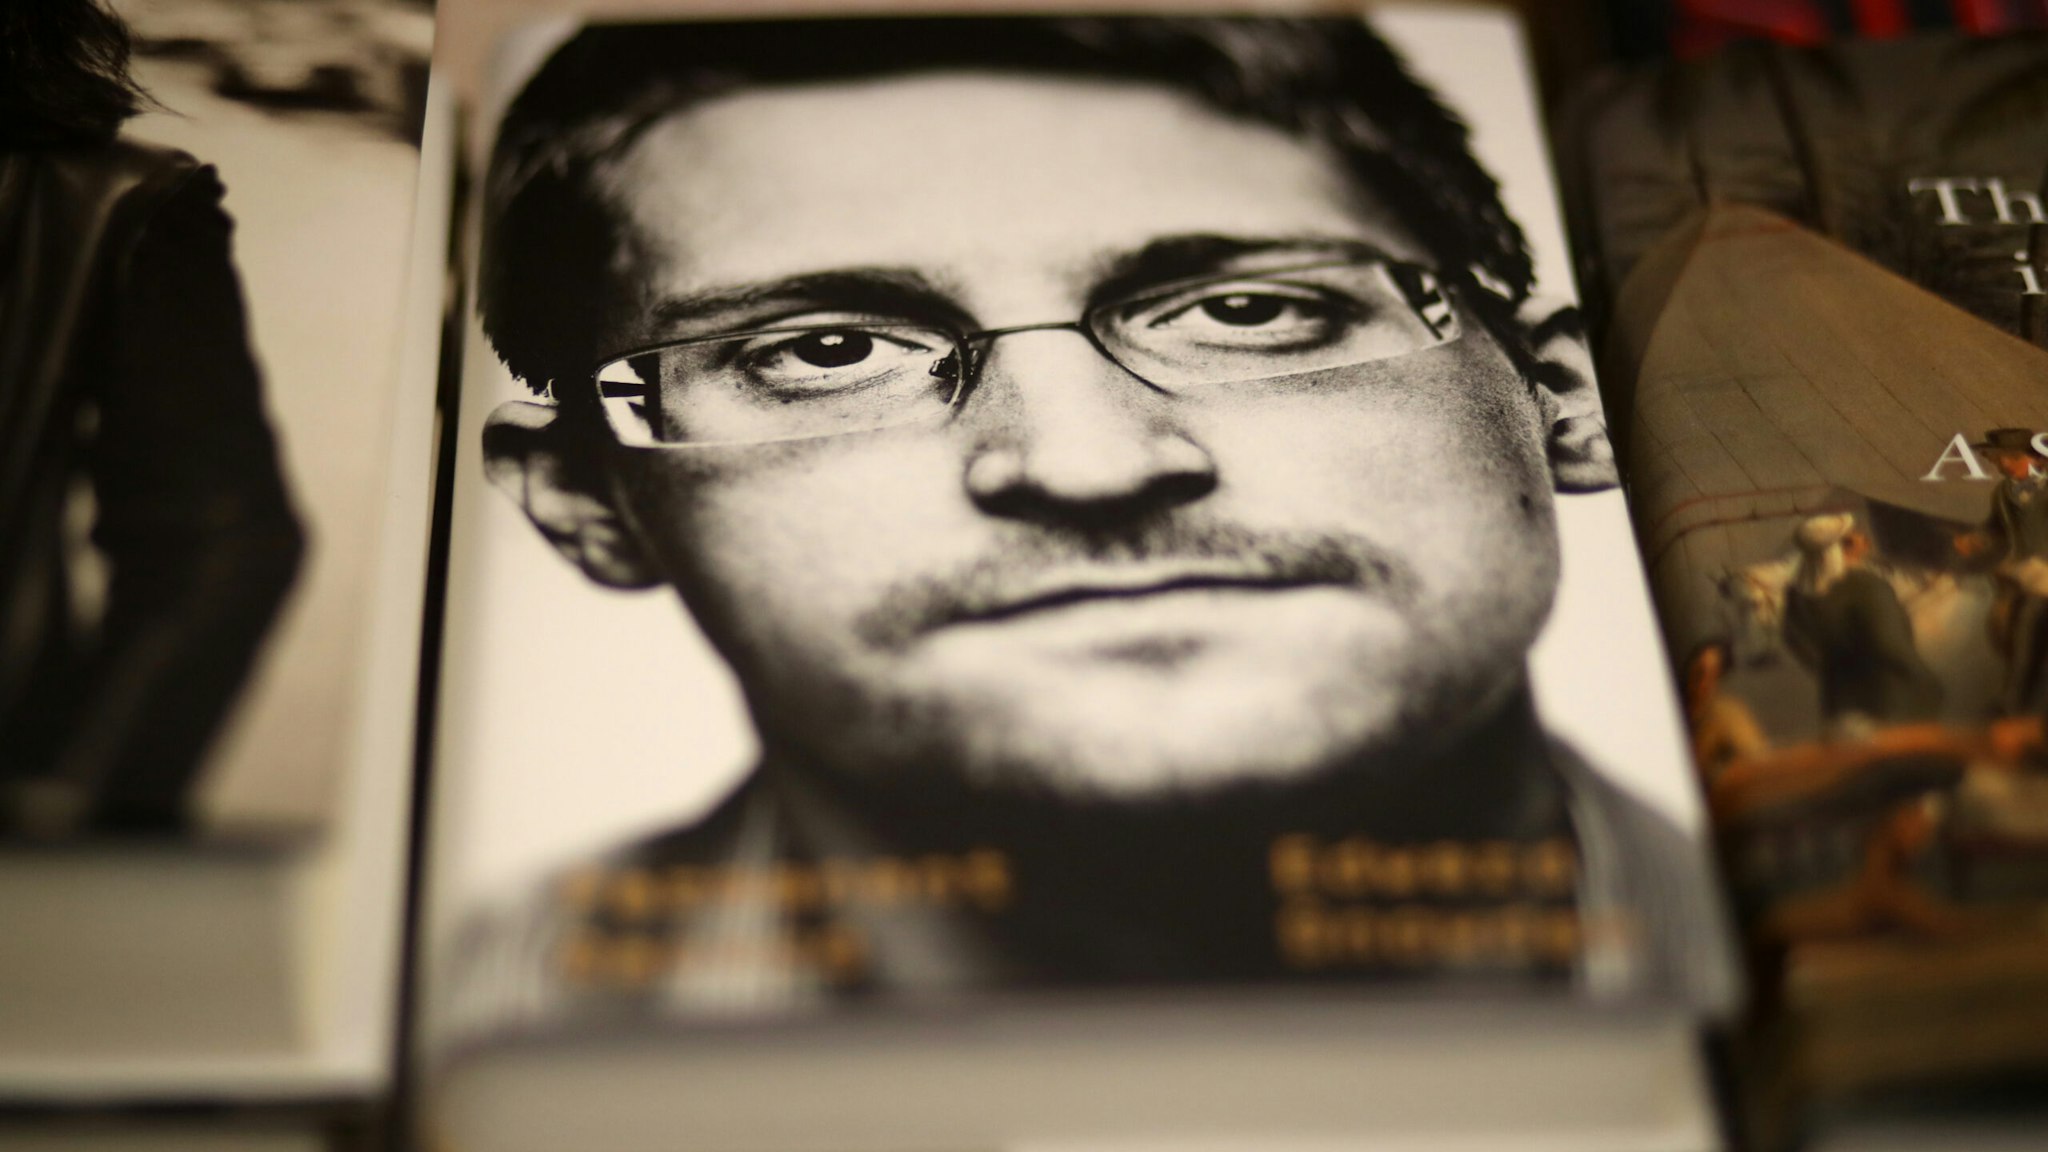 SAN FRANCISCO, CALIFORNIA - SEPTEMBER 17: Newly released "Permanent Record" by Edward Snowden is displayed on a shelf at Books Inc. on September 17, 2019 in San Francisco, California. The U.S. Justice Department has filed suit against Snowden, a former Central Intelligence Agency employee and contractor for the National Security Agency, alleging the book violates non-disclosure agreements. (Photo by Justin Sullivan/Getty Images